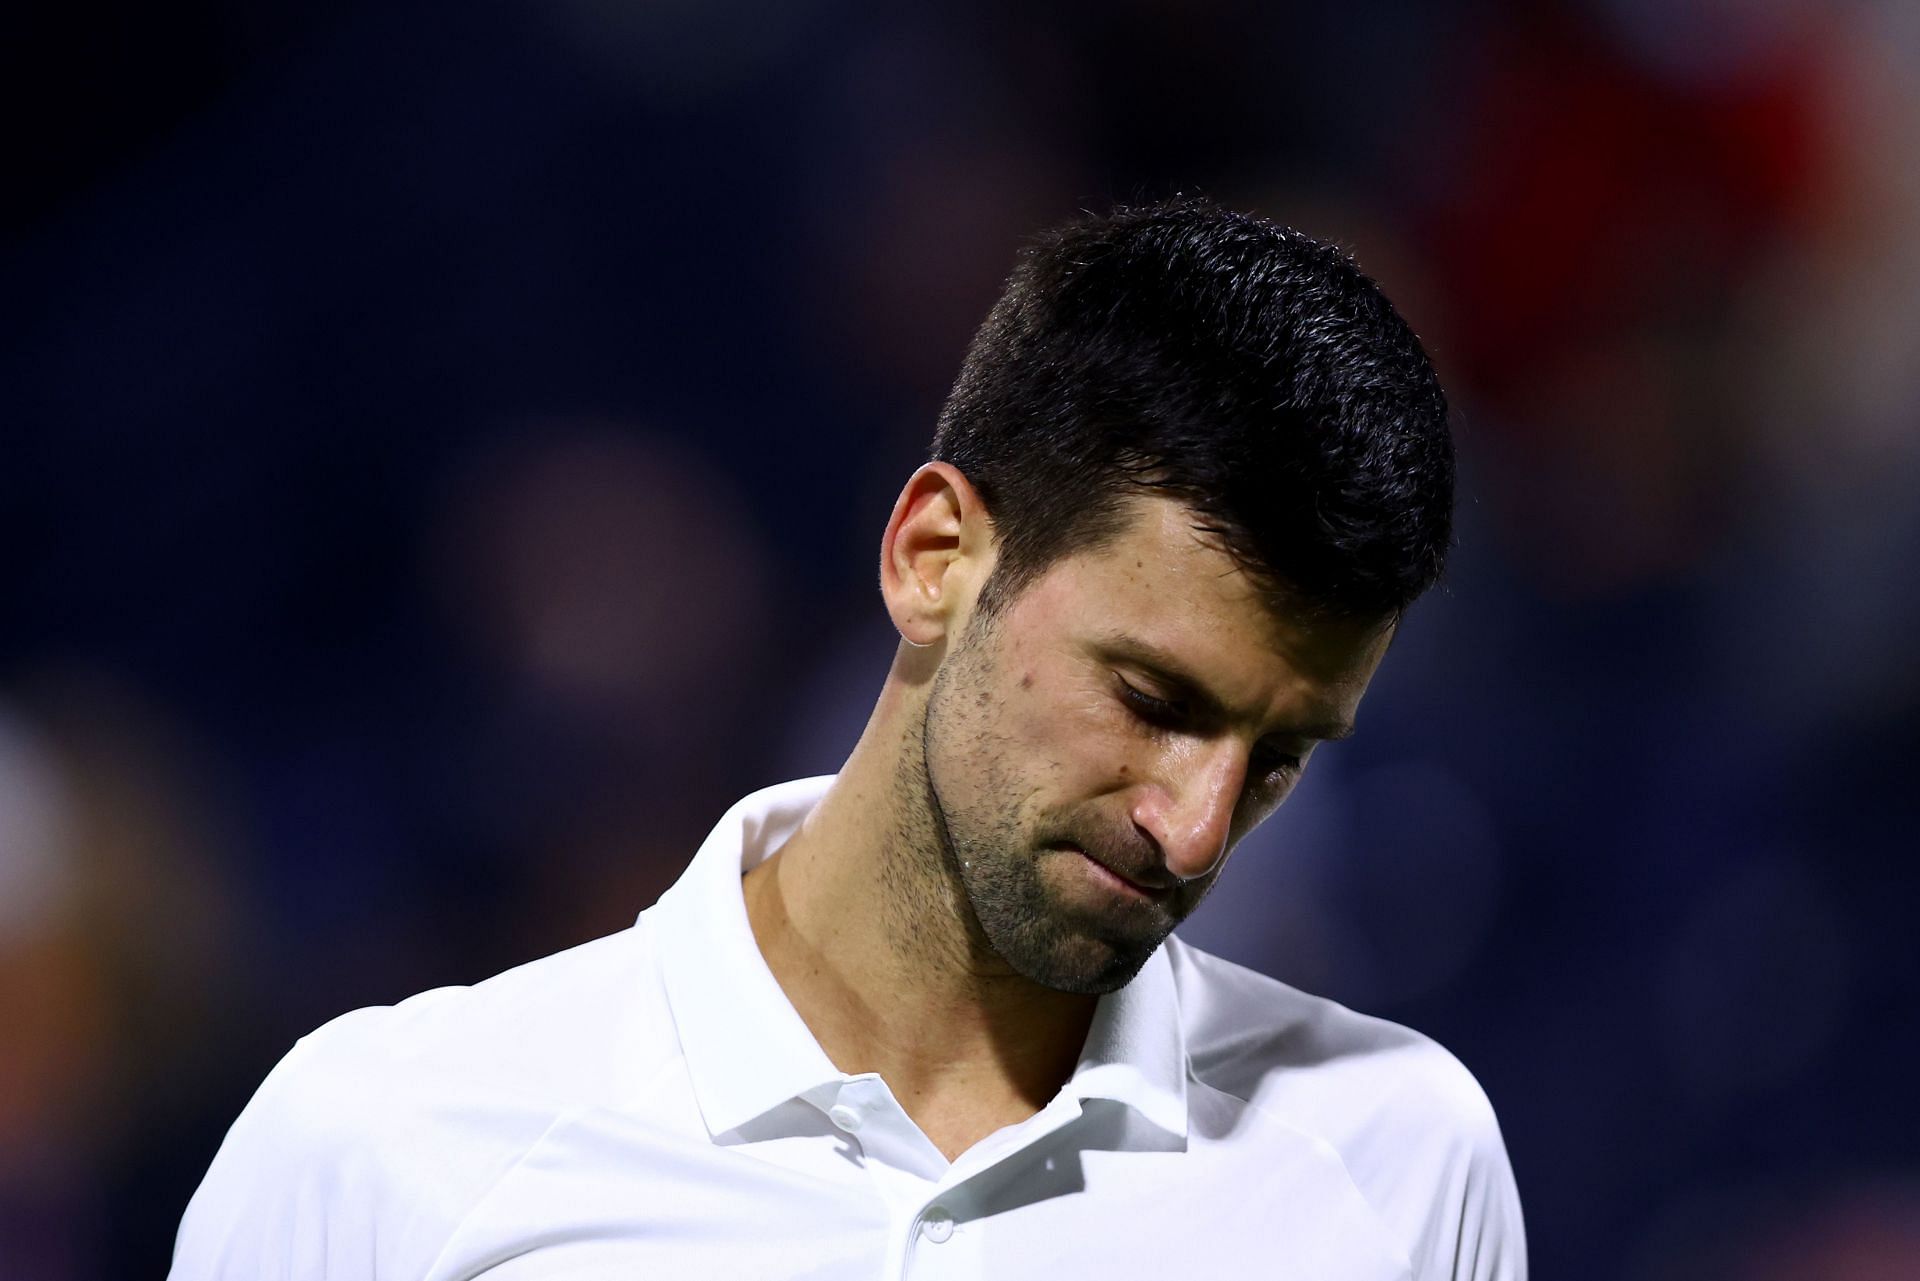 Novak Djokovic will find it hard to compete in the Canadian Open Roger Federer posted a video of himself practicing in an indoor court BNP Paribas Open - Day 13 returned